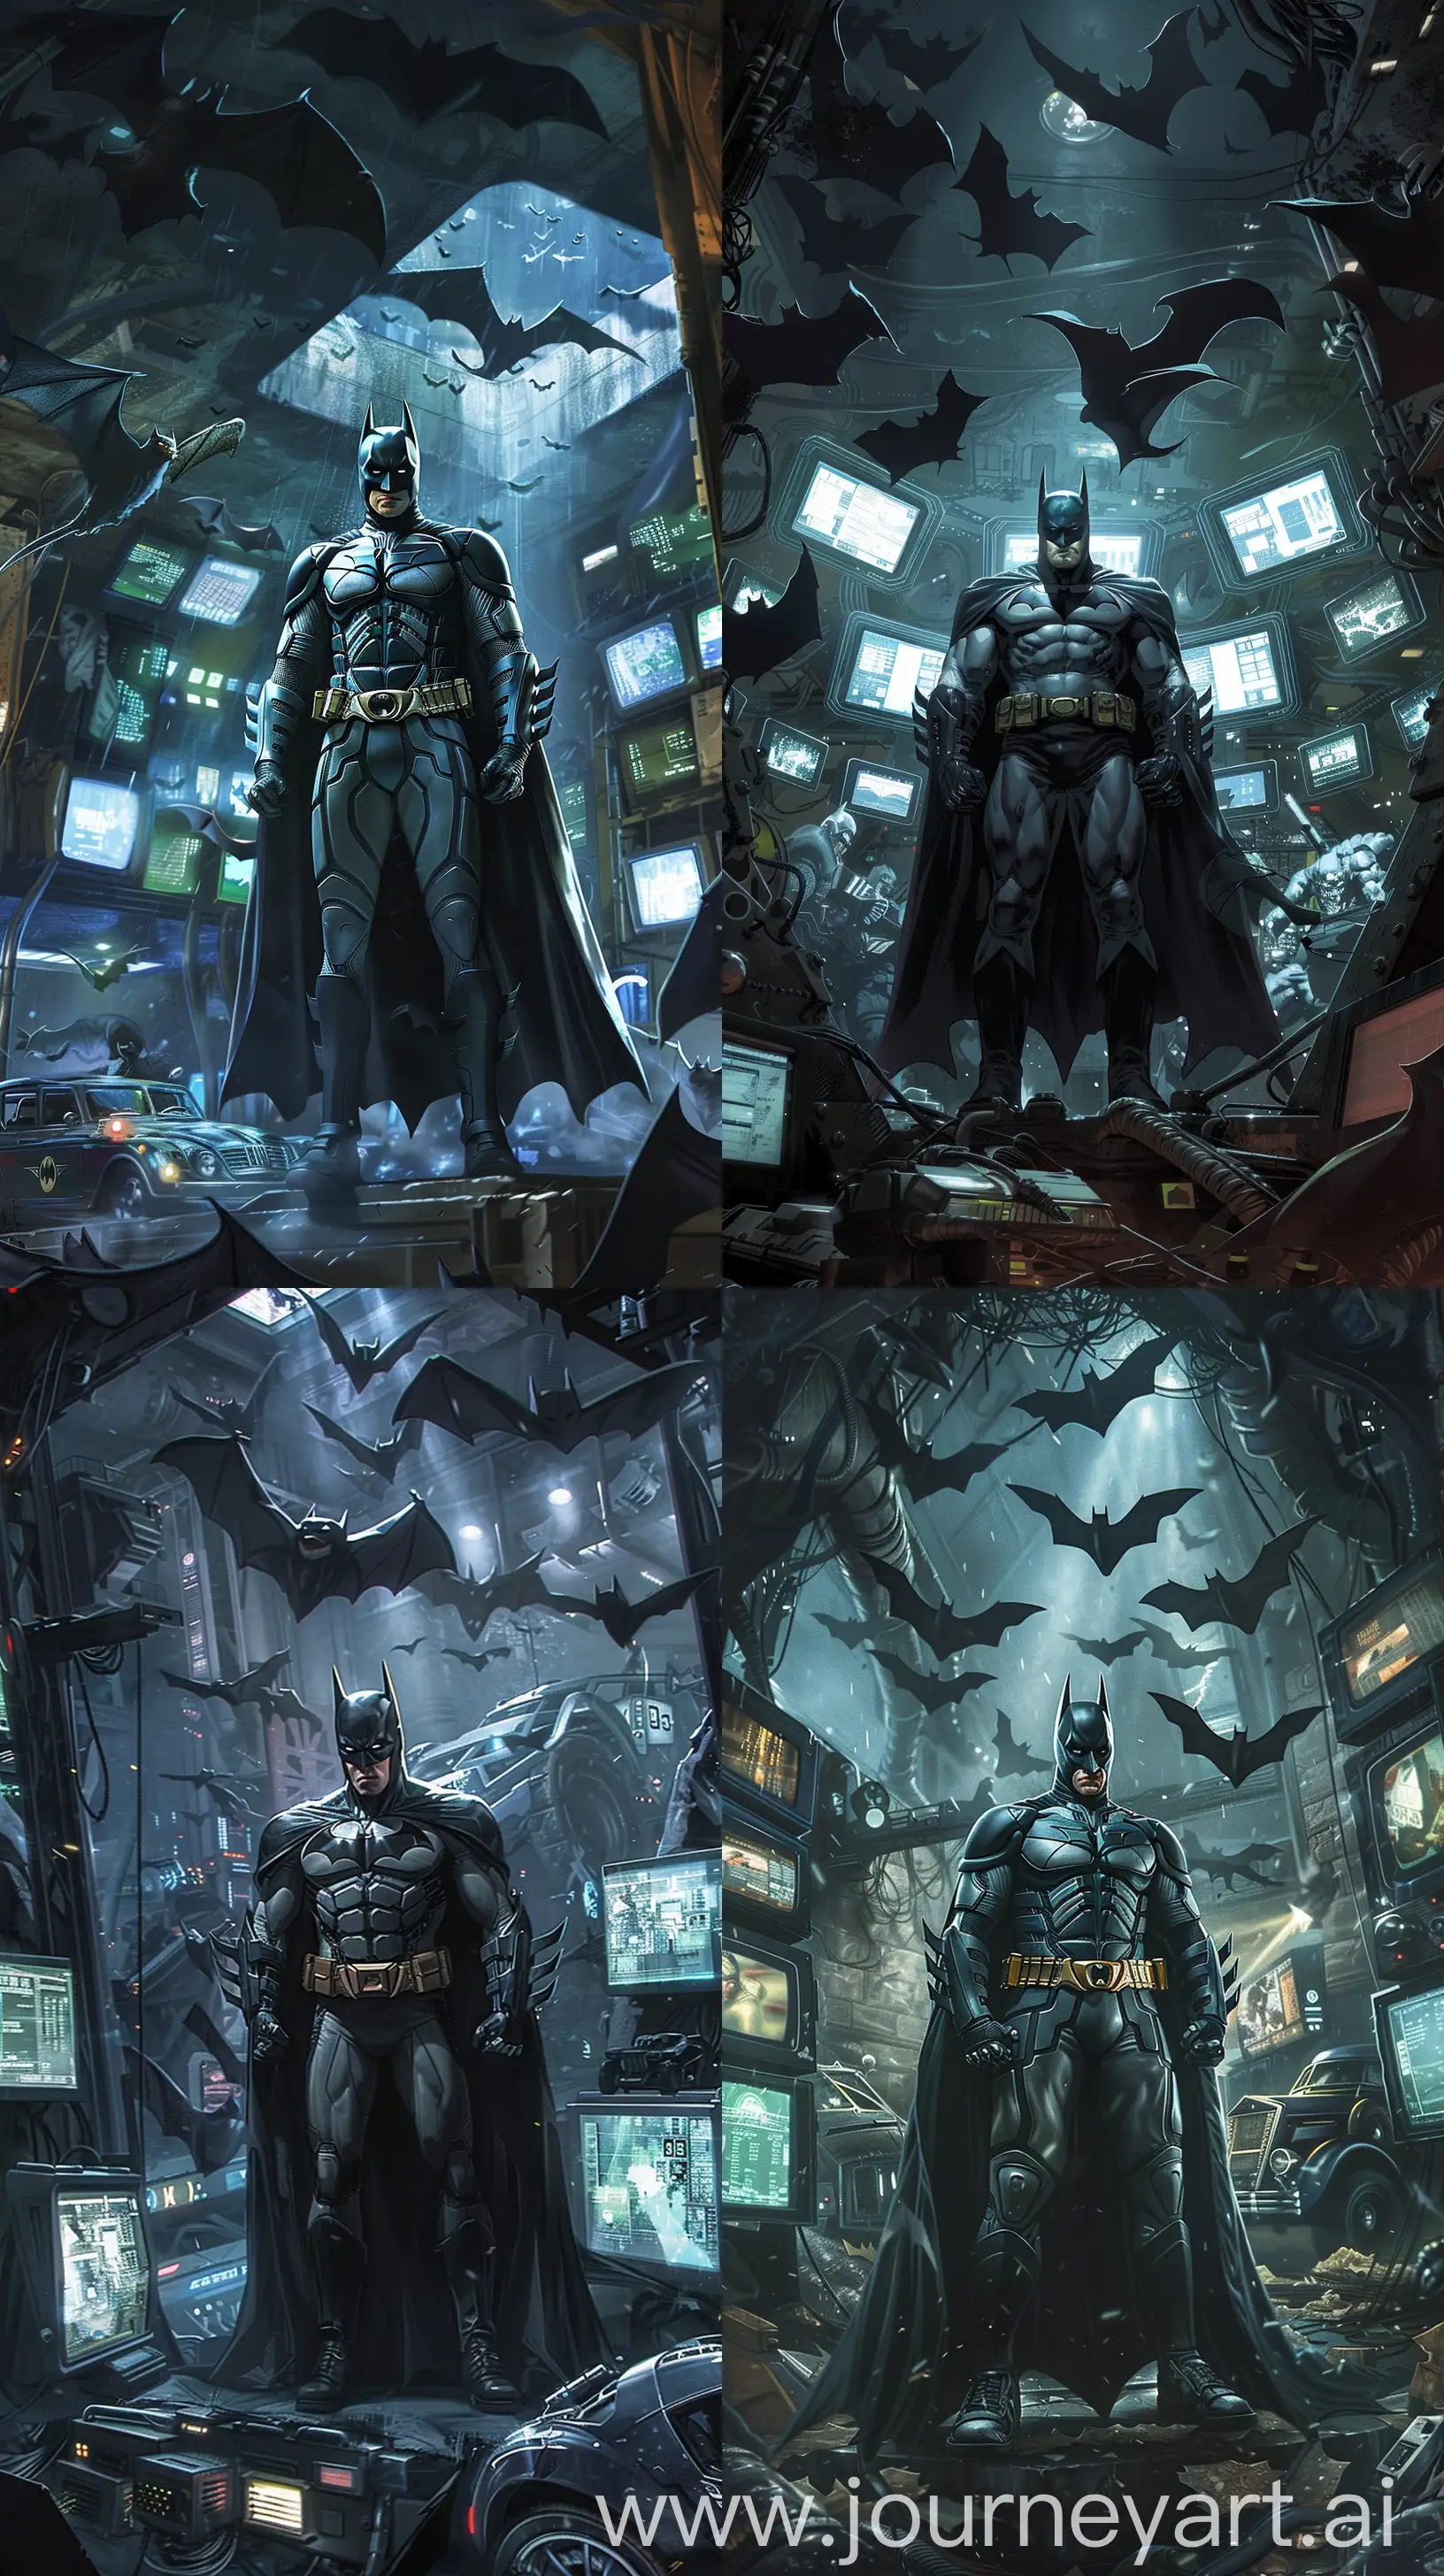 Design a phone wallpaper featuring Batman in the Batcave, in the style of Alexander Miller's artistic vision. Capture the Dark Knight amidst the high-tech chaos of his lair, surrounded by glowing screens, bats fluttering overhead, and the iconic Batmobile lurking in the shadows. The mood should be somber and intense, with a spotlight highlighting Batman as he strategizes his next move against Gotham's criminal underworld , --ar 9:16